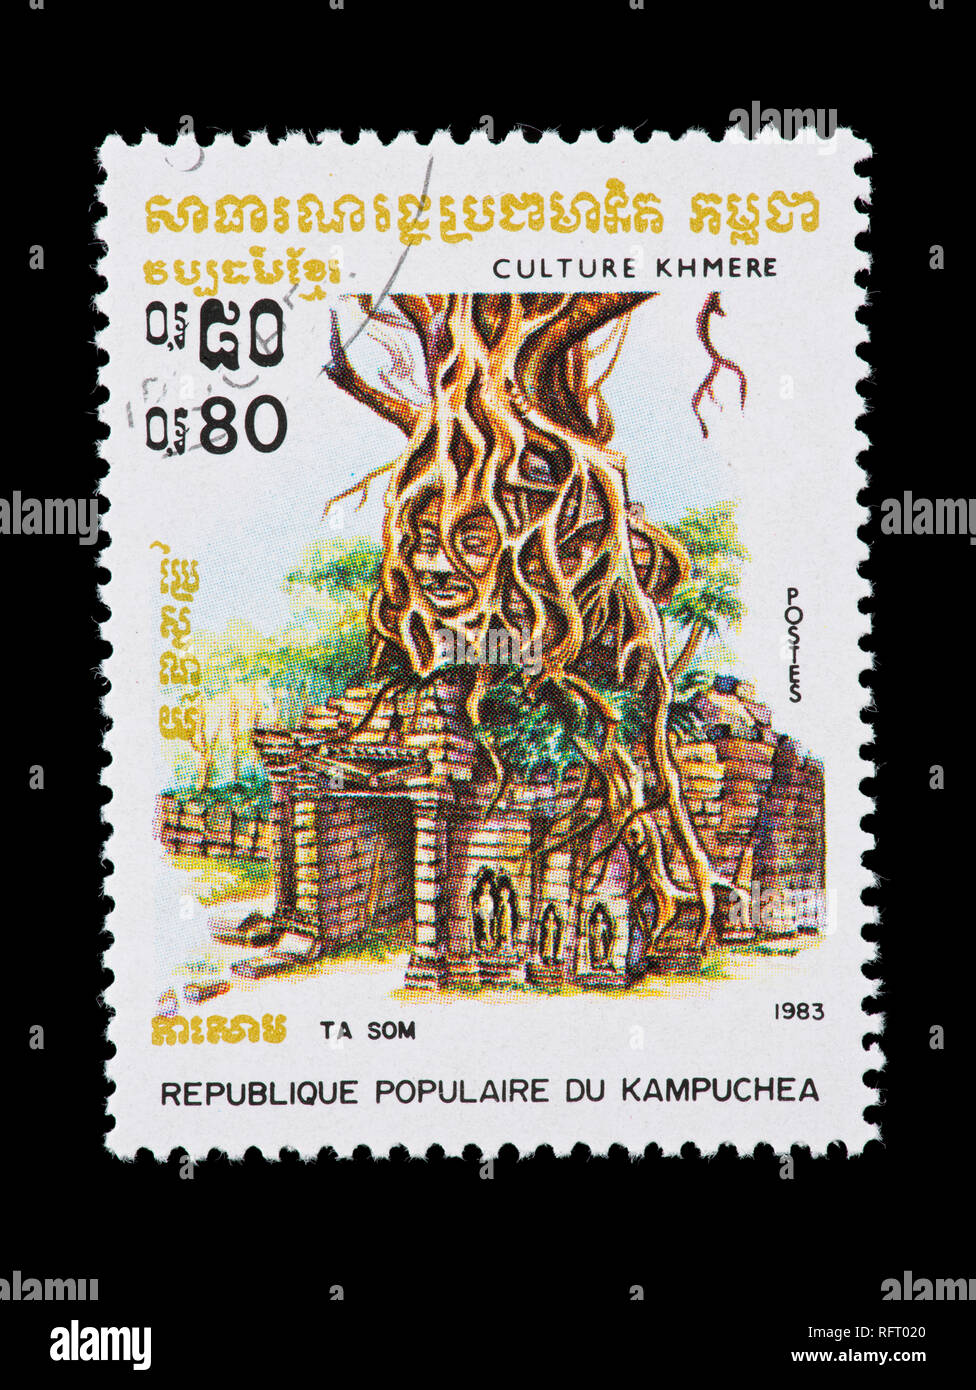 Postage stamp from Cambodia (Kampuchea) depicting Ta Son, issued for Khmer culture Stock Photo